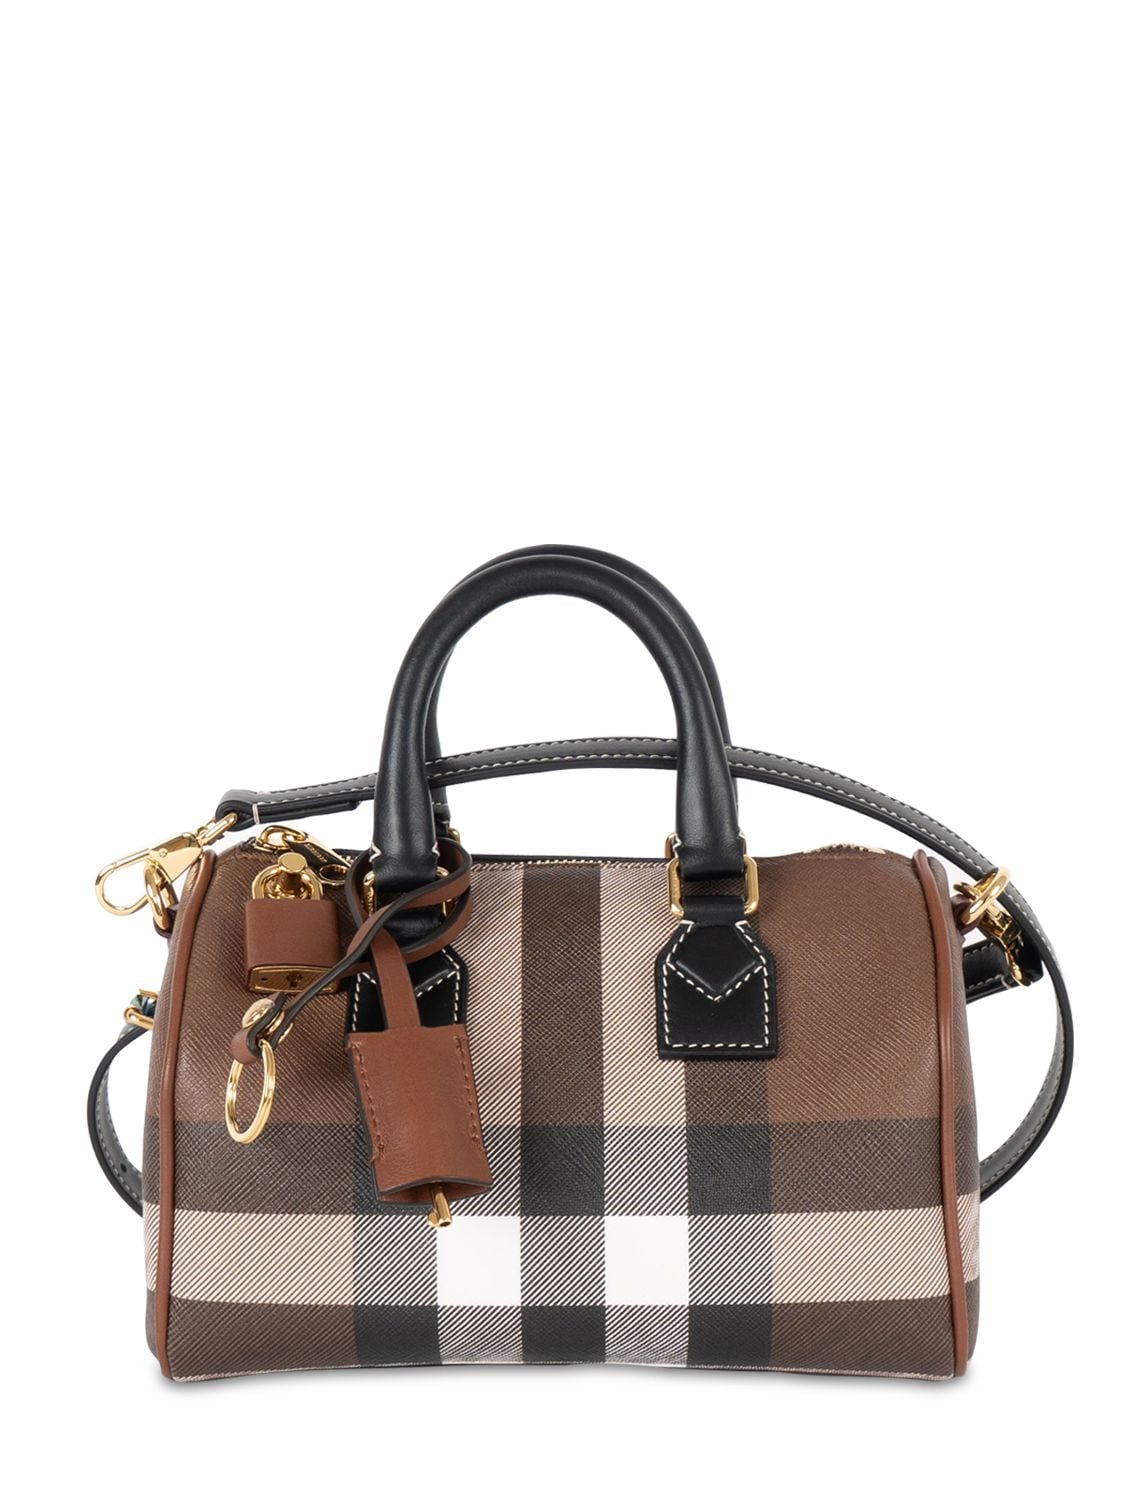 Burberry Mini Bowling Check Canvas & Leather Bag In Dark Birch Brow